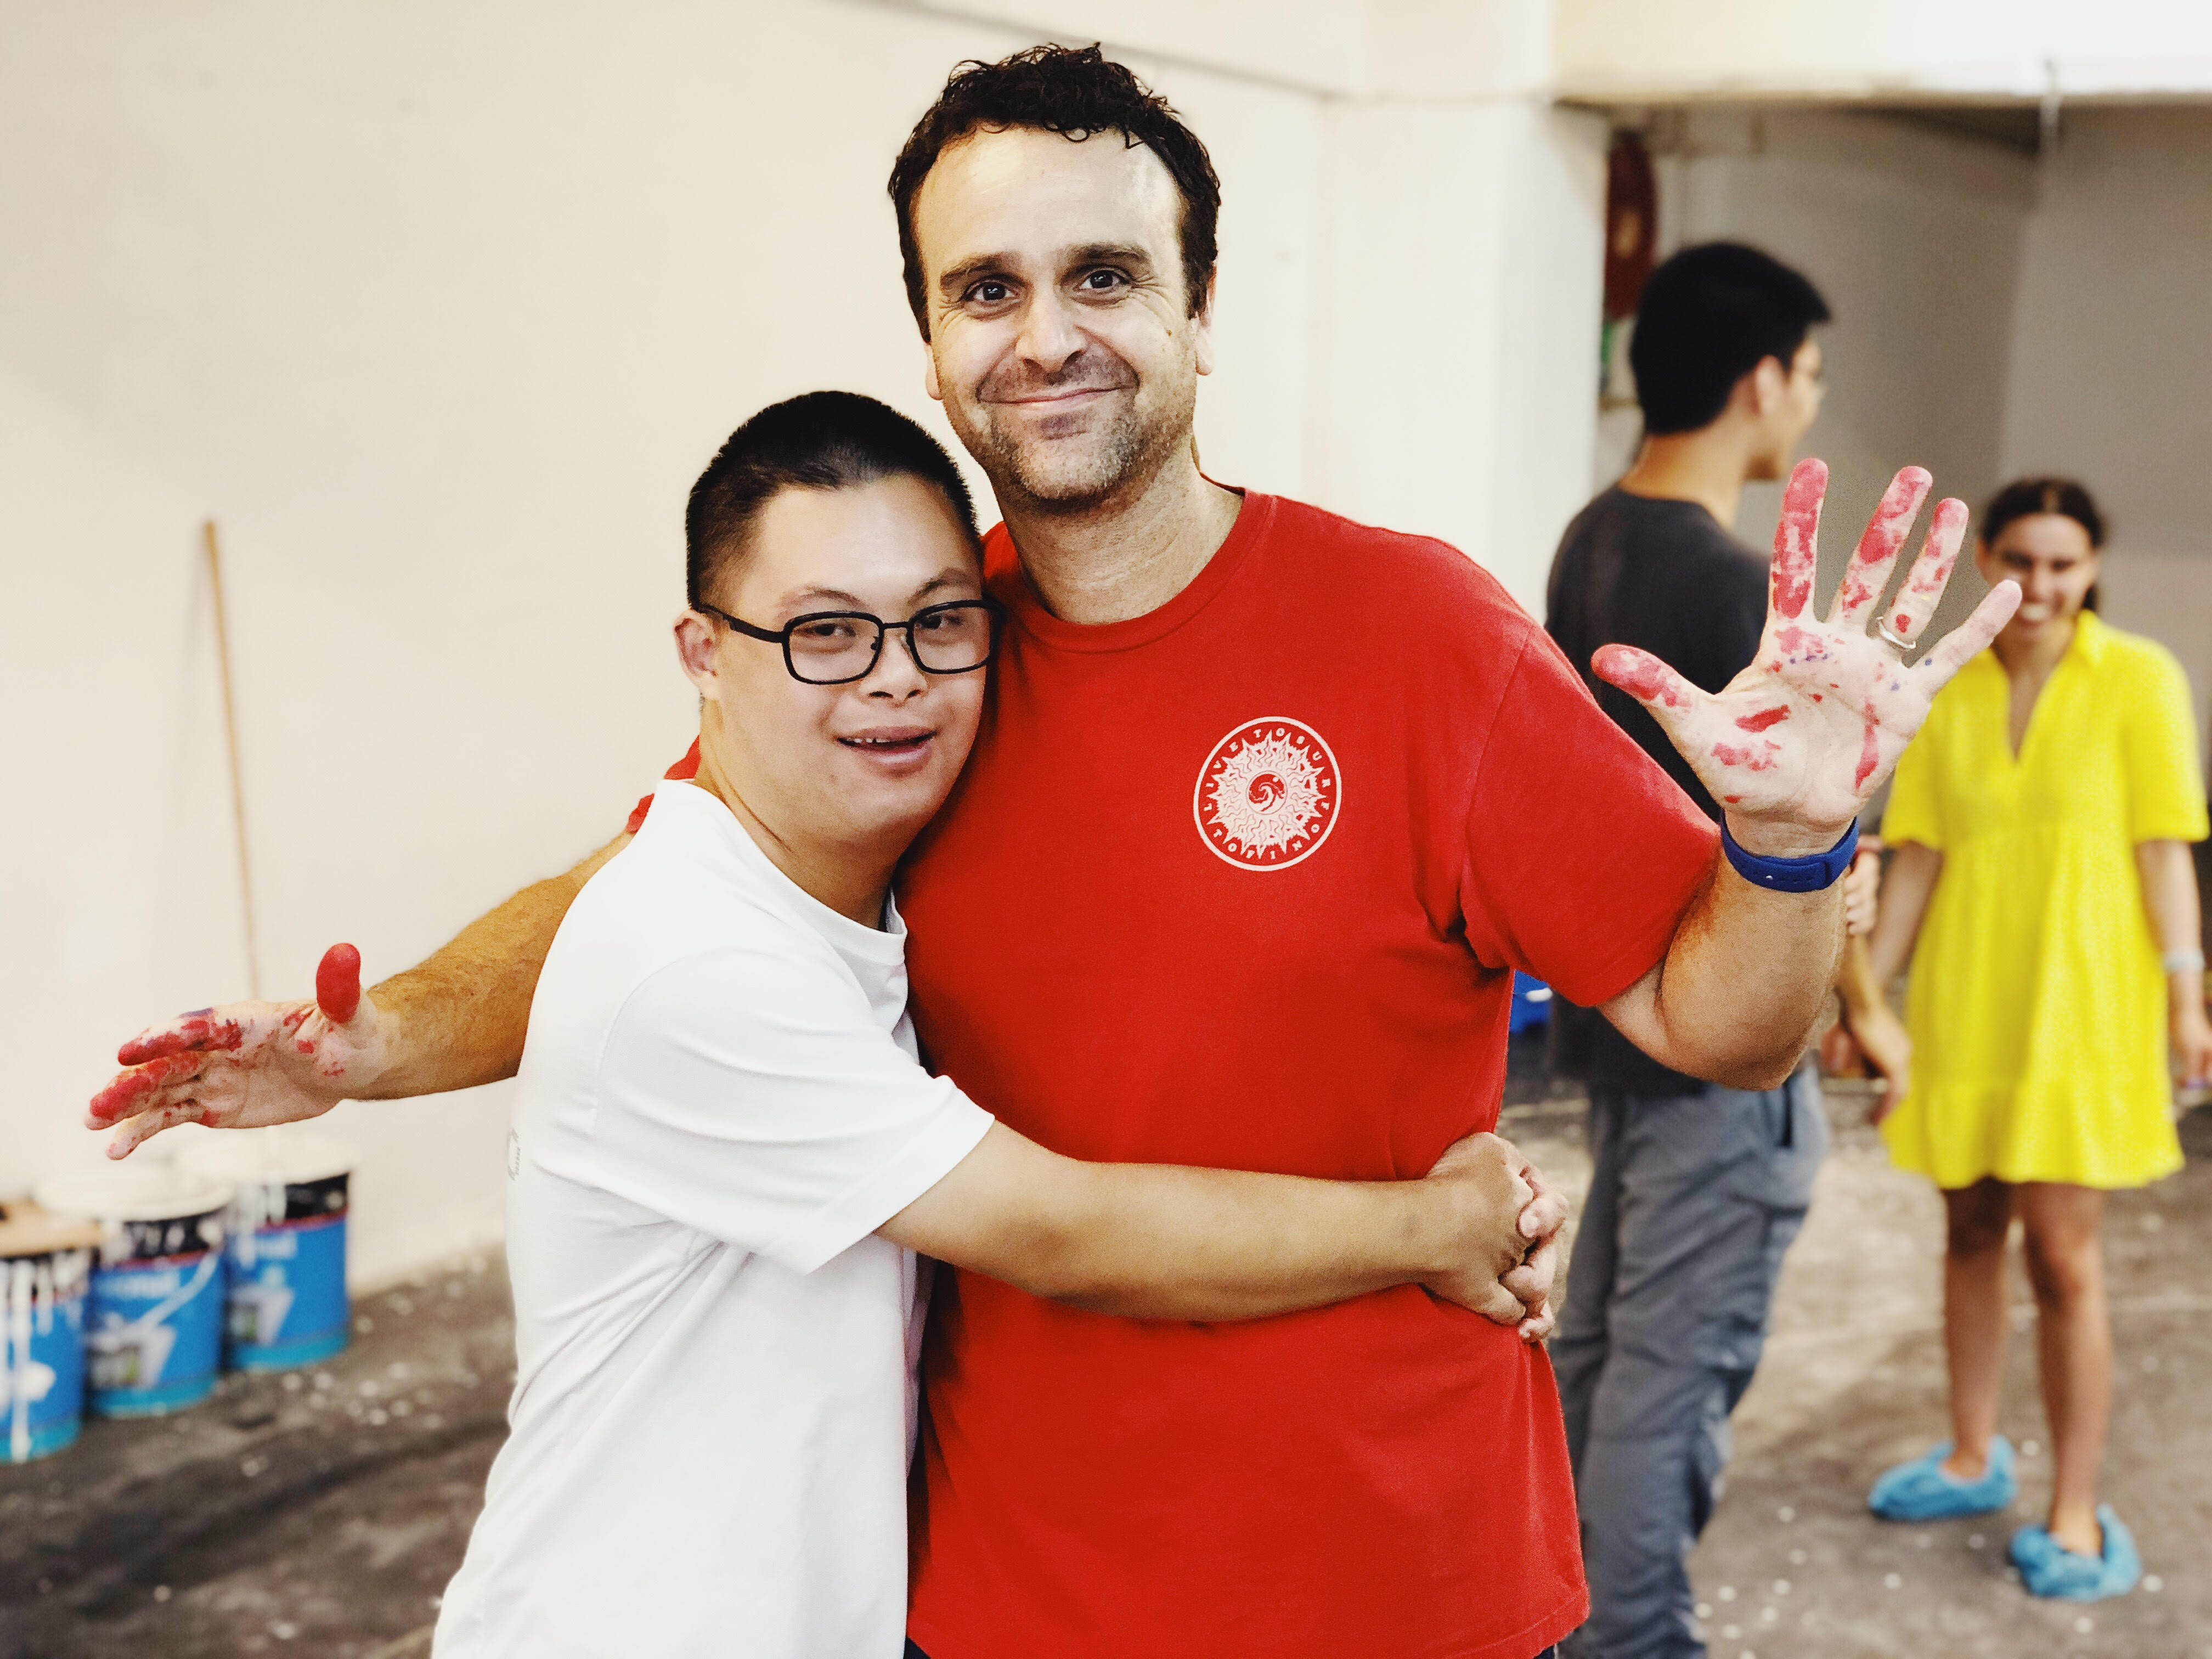 The founder of the ImpactHK and Love 21 charities, Jeff Rotmeyer talks about his mission to educate Hong Kong society on how to be kinder. Photo: Jeff Rotmeyer